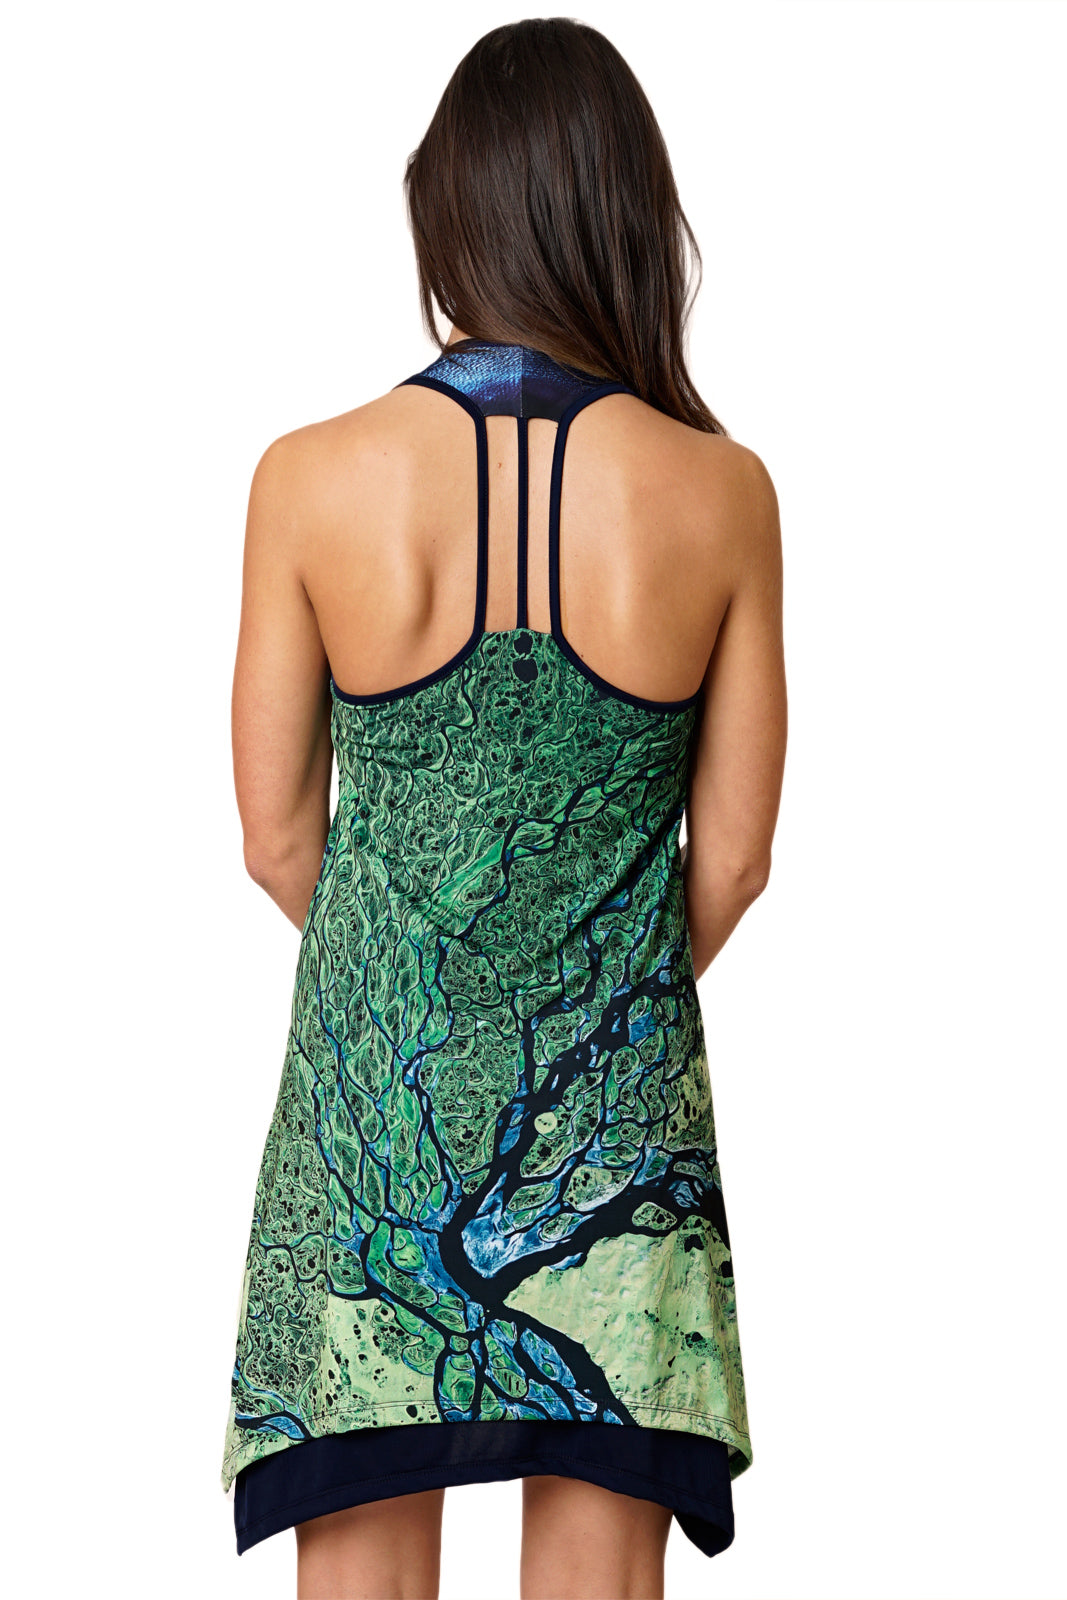 Gypsy Dress-National Geographic Clothing-Map Dress-Nature Clothing –  InVisions